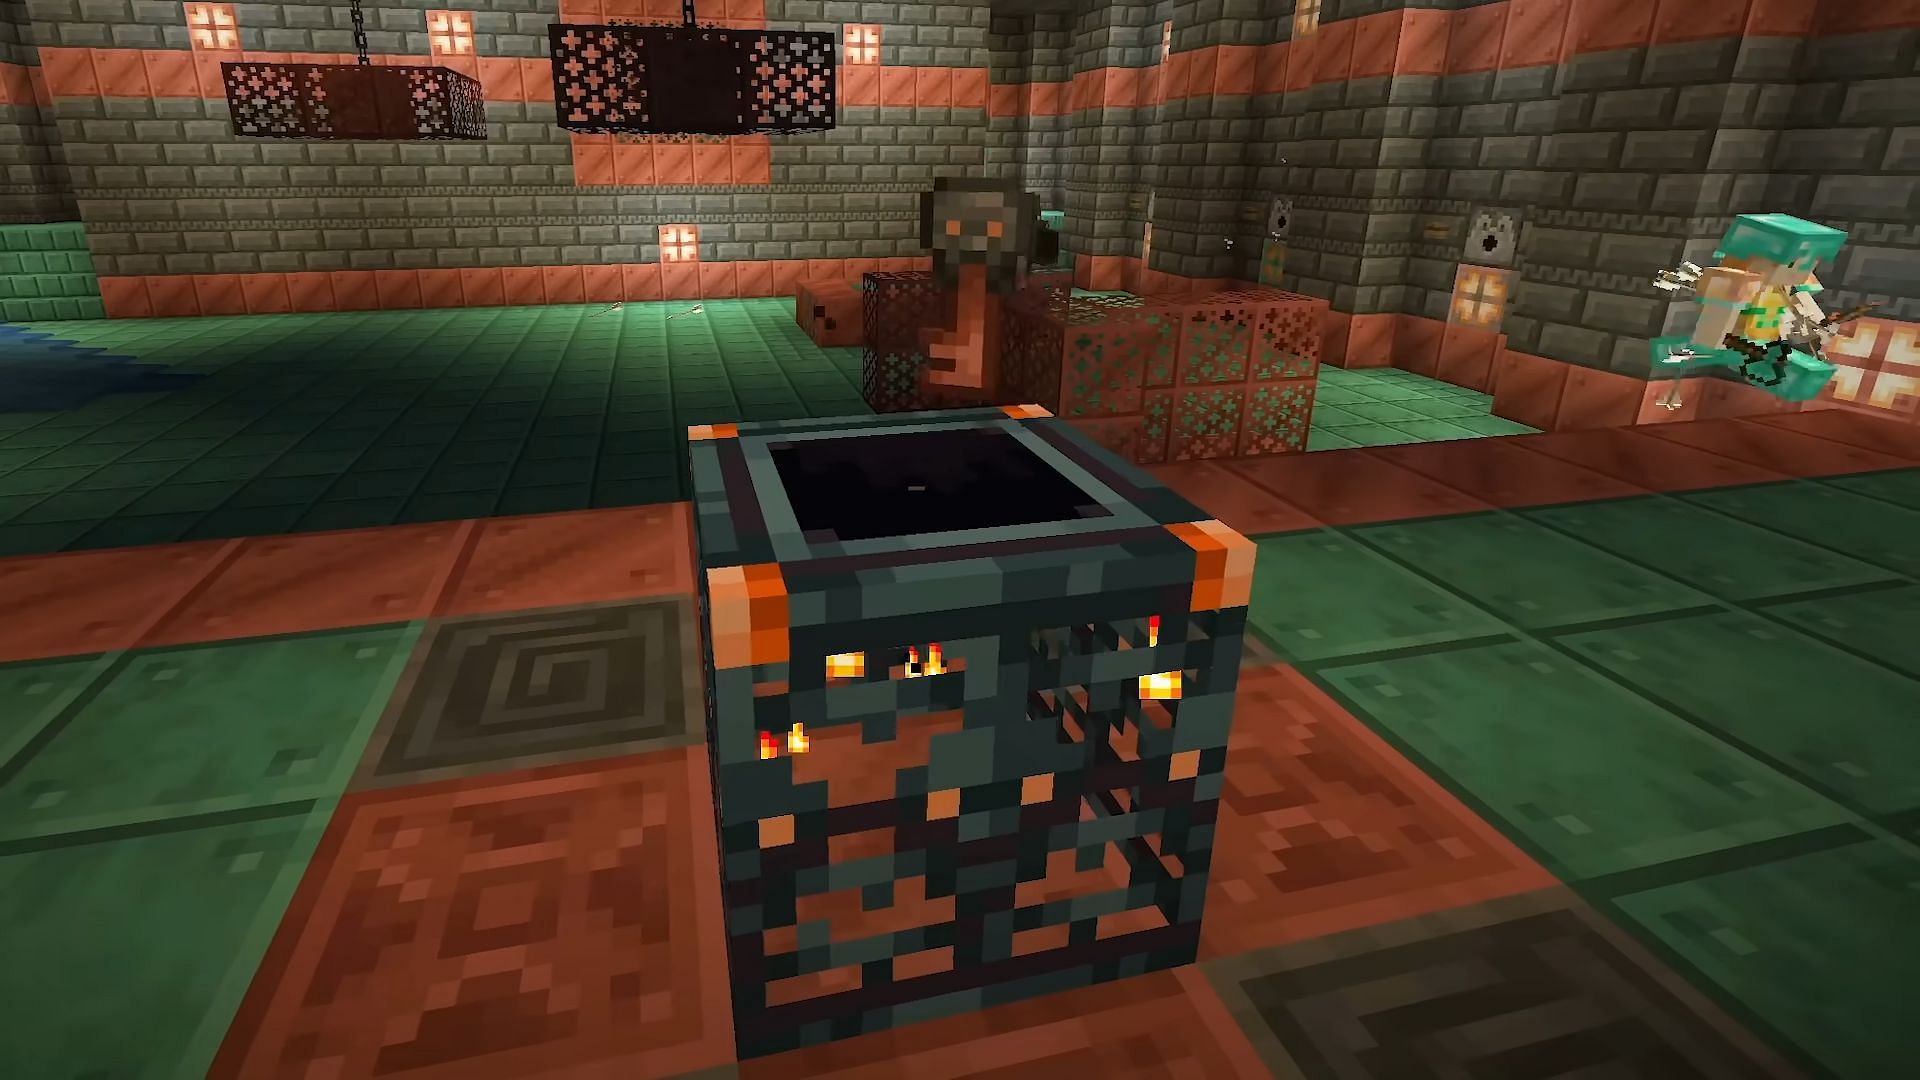 Vaults can only be opened via a trial key in Minecraft (Image via Mojang)